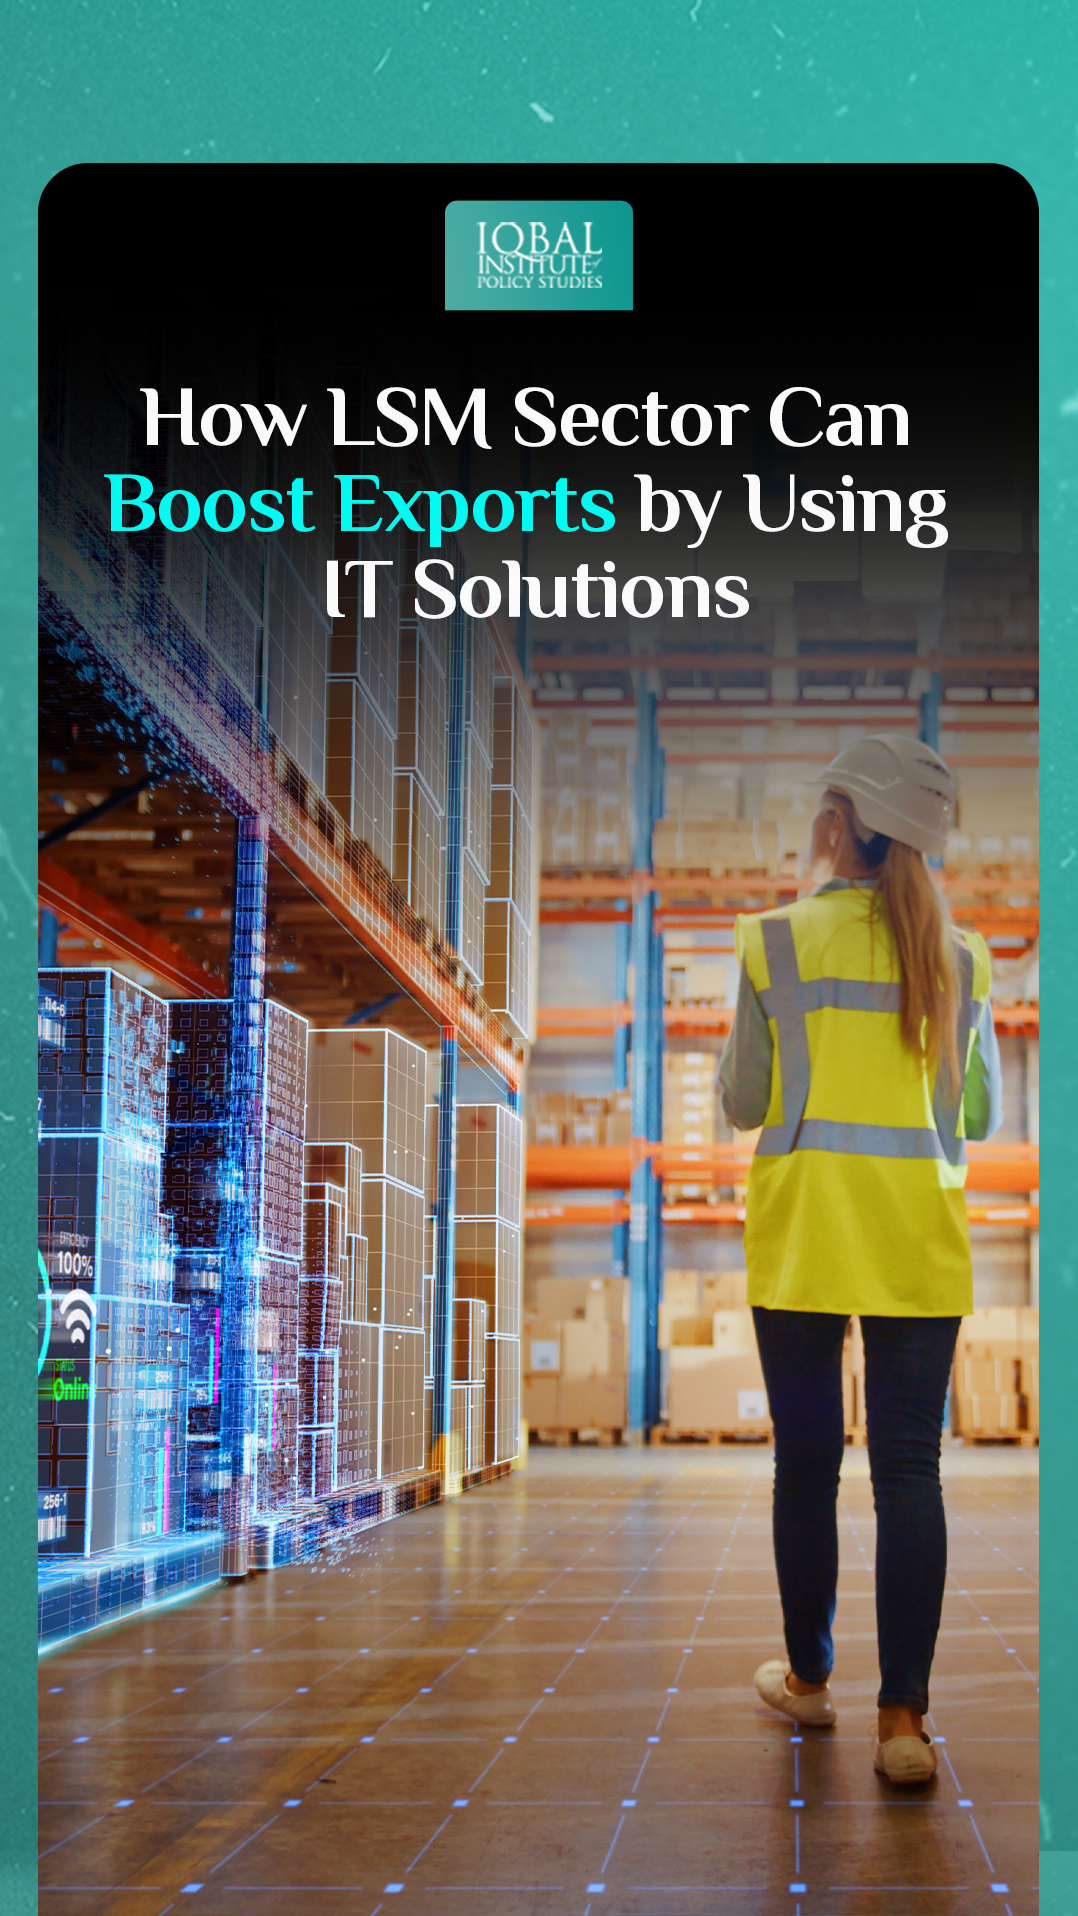 How LSM Sector can Boost Exports by Using IT Solutions